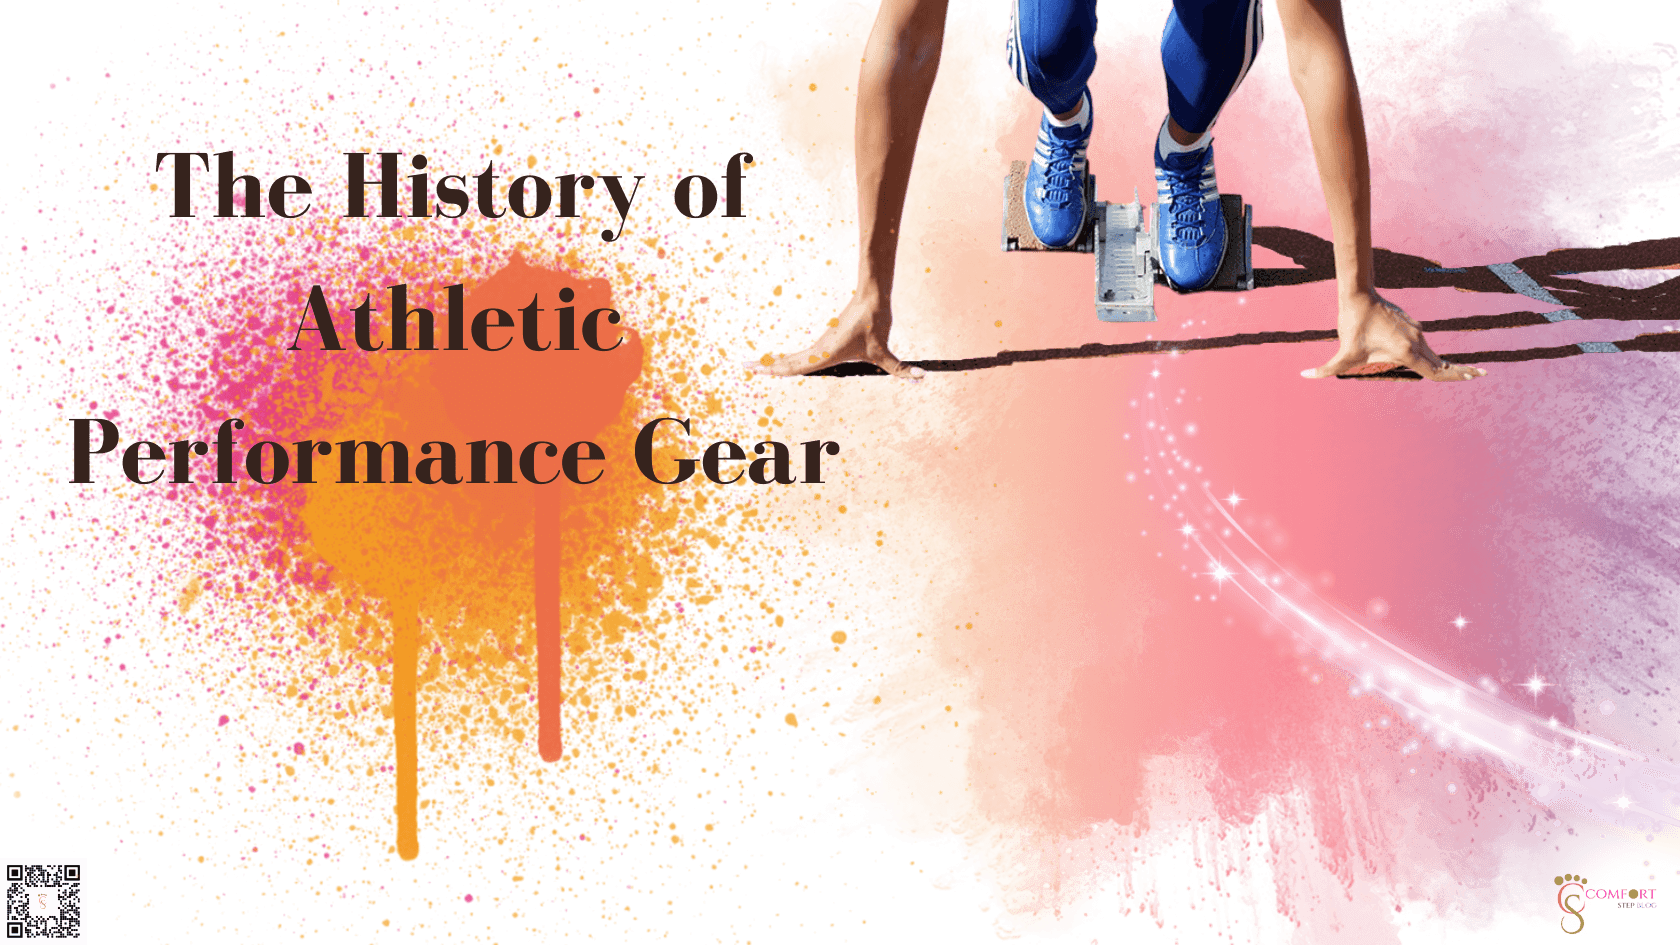 The History of Athletic Performance Gear